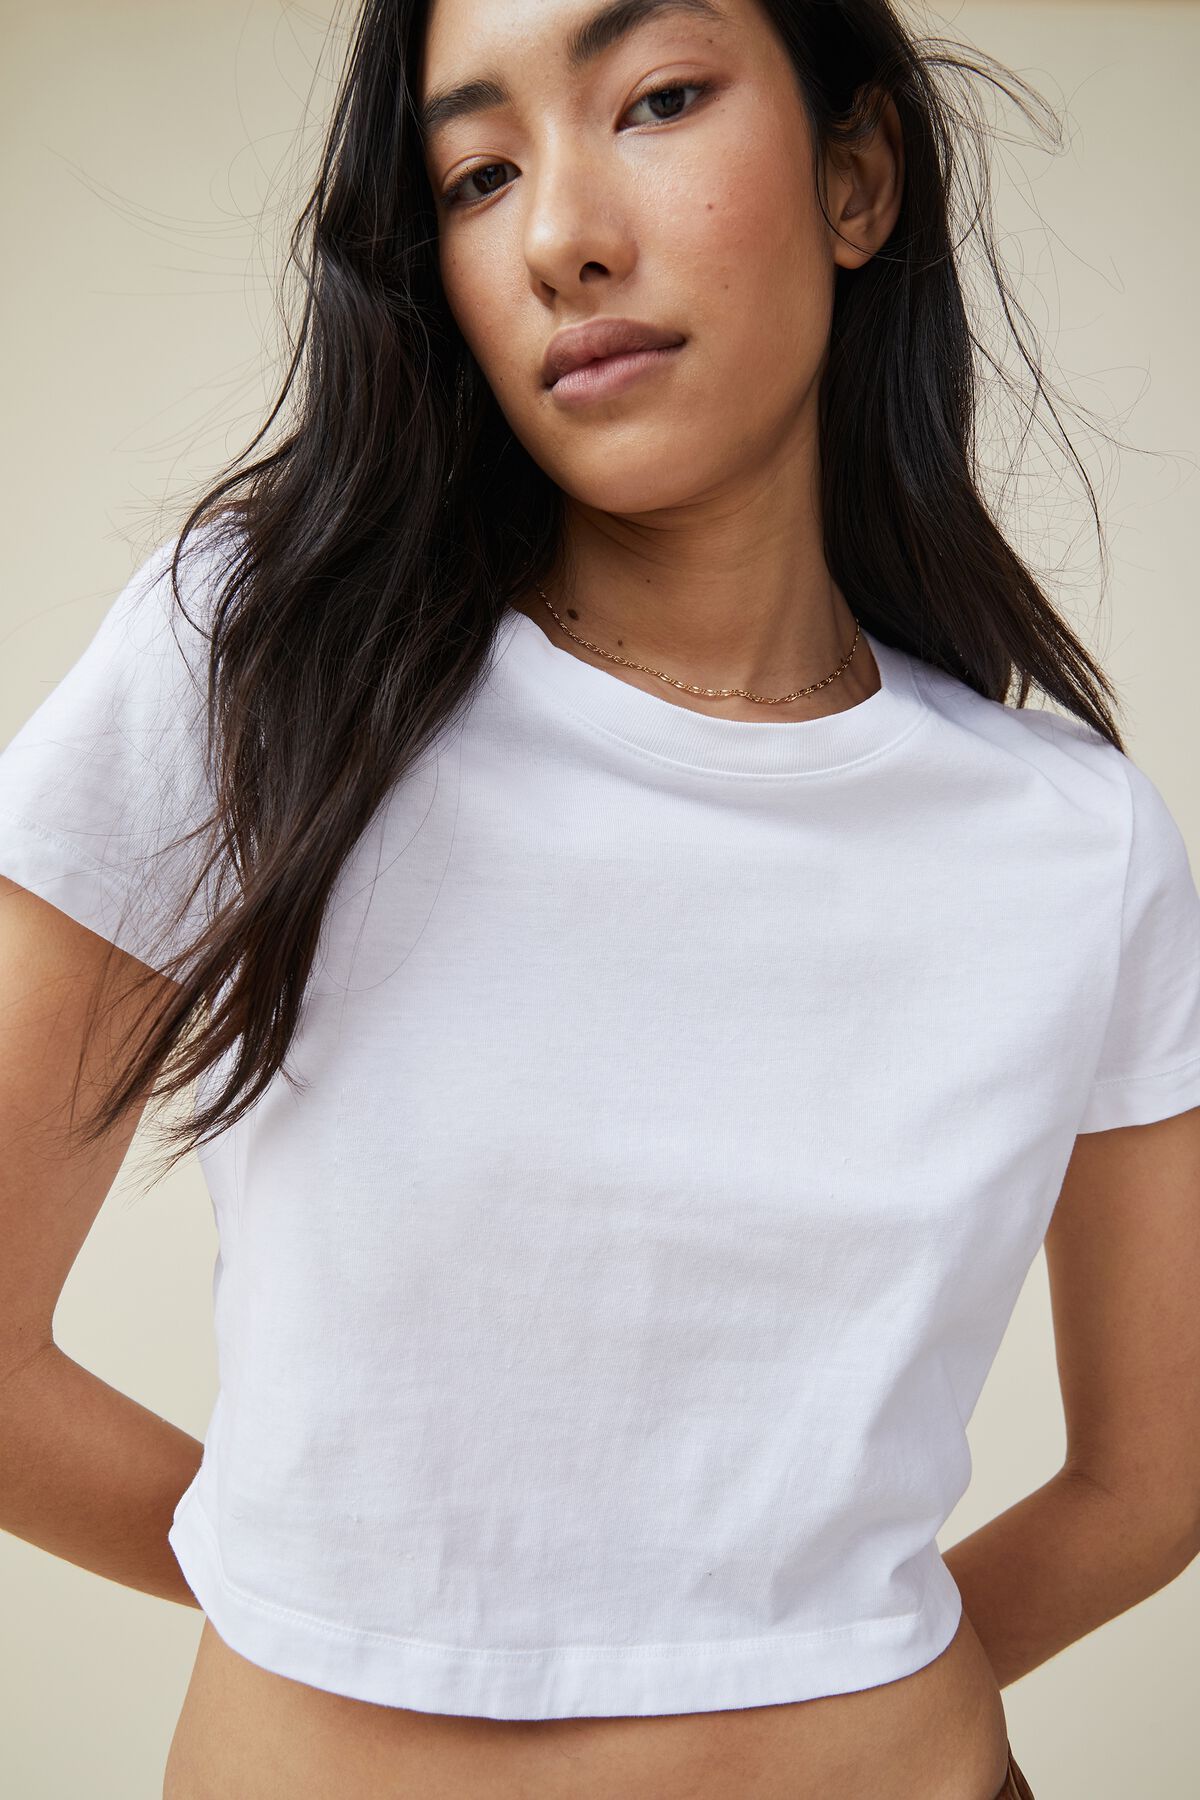 The Baby Tee | Cotton On (ANZ)